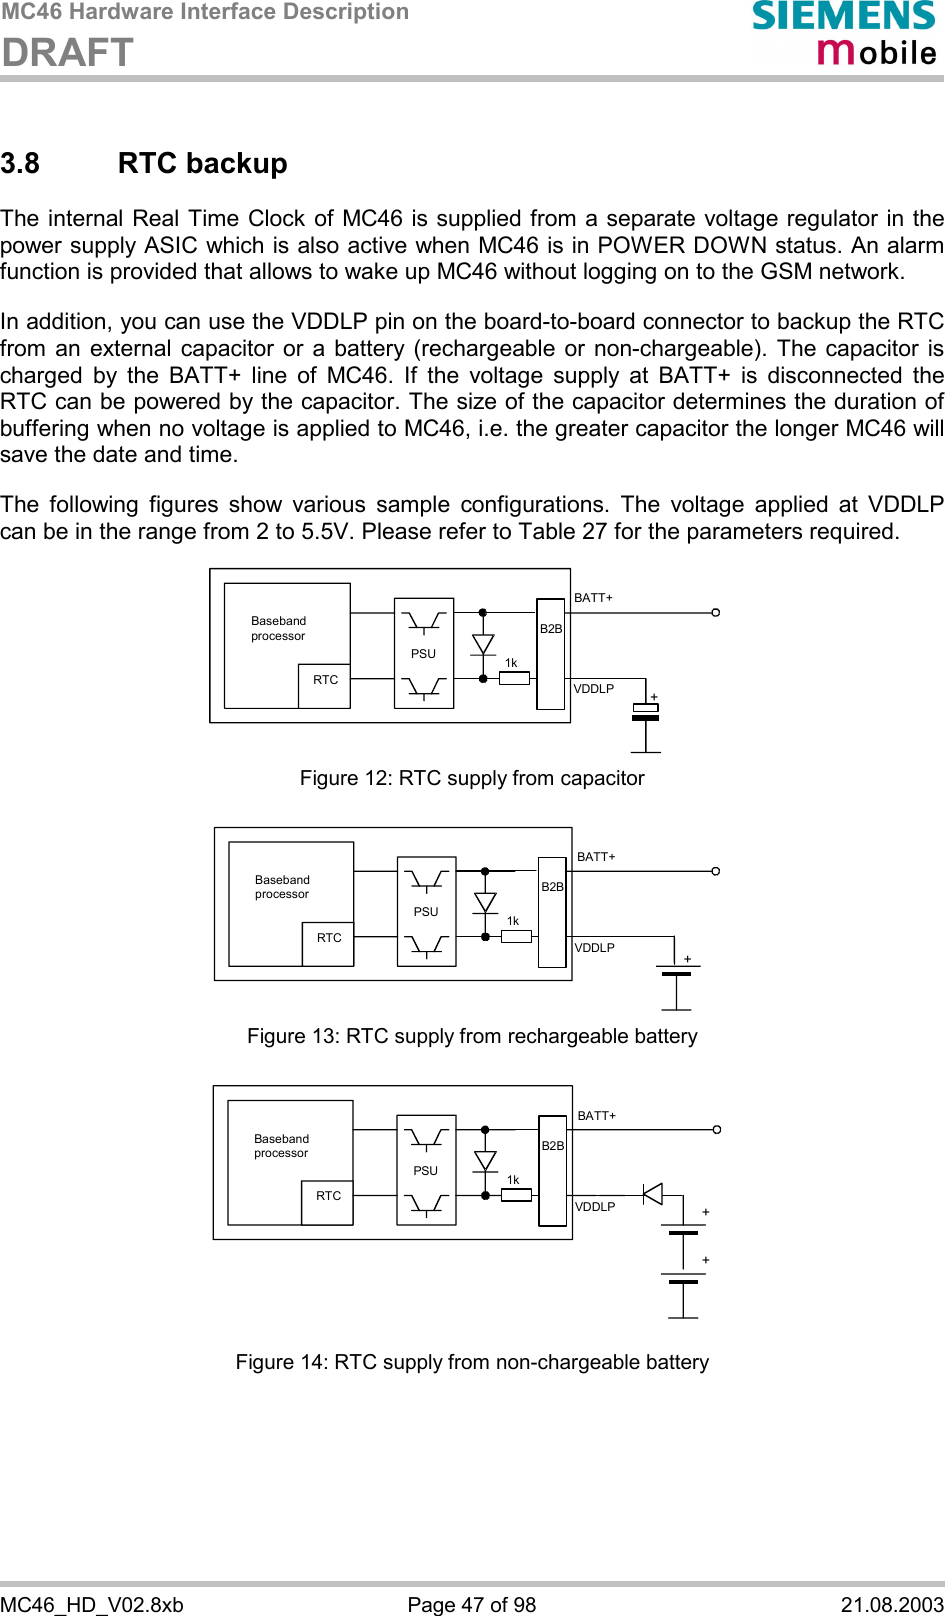 MC46 Hardware Interface Description DRAFT      MC46_HD_V02.8xb  Page 47 of 98  21.08.2003 3.8 RTC backup The internal Real Time Clock of MC46 is supplied from a separate voltage regulator in the power supply ASIC which is also active when MC46 is in POWER DOWN status. An alarm function is provided that allows to wake up MC46 without logging on to the GSM network.   In addition, you can use the VDDLP pin on the board-to-board connector to backup the RTC from an external capacitor or a battery (rechargeable or non-chargeable). The capacitor is charged by the BATT+ line of MC46. If the voltage supply at BATT+ is disconnected the RTC can be powered by the capacitor. The size of the capacitor determines the duration of buffering when no voltage is applied to MC46, i.e. the greater capacitor the longer MC46 will save the date and time.   The following figures show various sample configurations. The voltage applied at VDDLP can be in the range from 2 to 5.5V. Please refer to Table 27 for the parameters required.    Baseband processor RTC PSU+BATT+ 1kB2BVDDLP Figure 12: RTC supply from capacitor   RTC PSU+BATT+ 1kB2BVDDLPBaseband processor  Figure 13: RTC supply from rechargeable battery   RTC PSU++BATT+ 1kVDDLPB2BBaseband processor  Figure 14: RTC supply from non-chargeable battery 